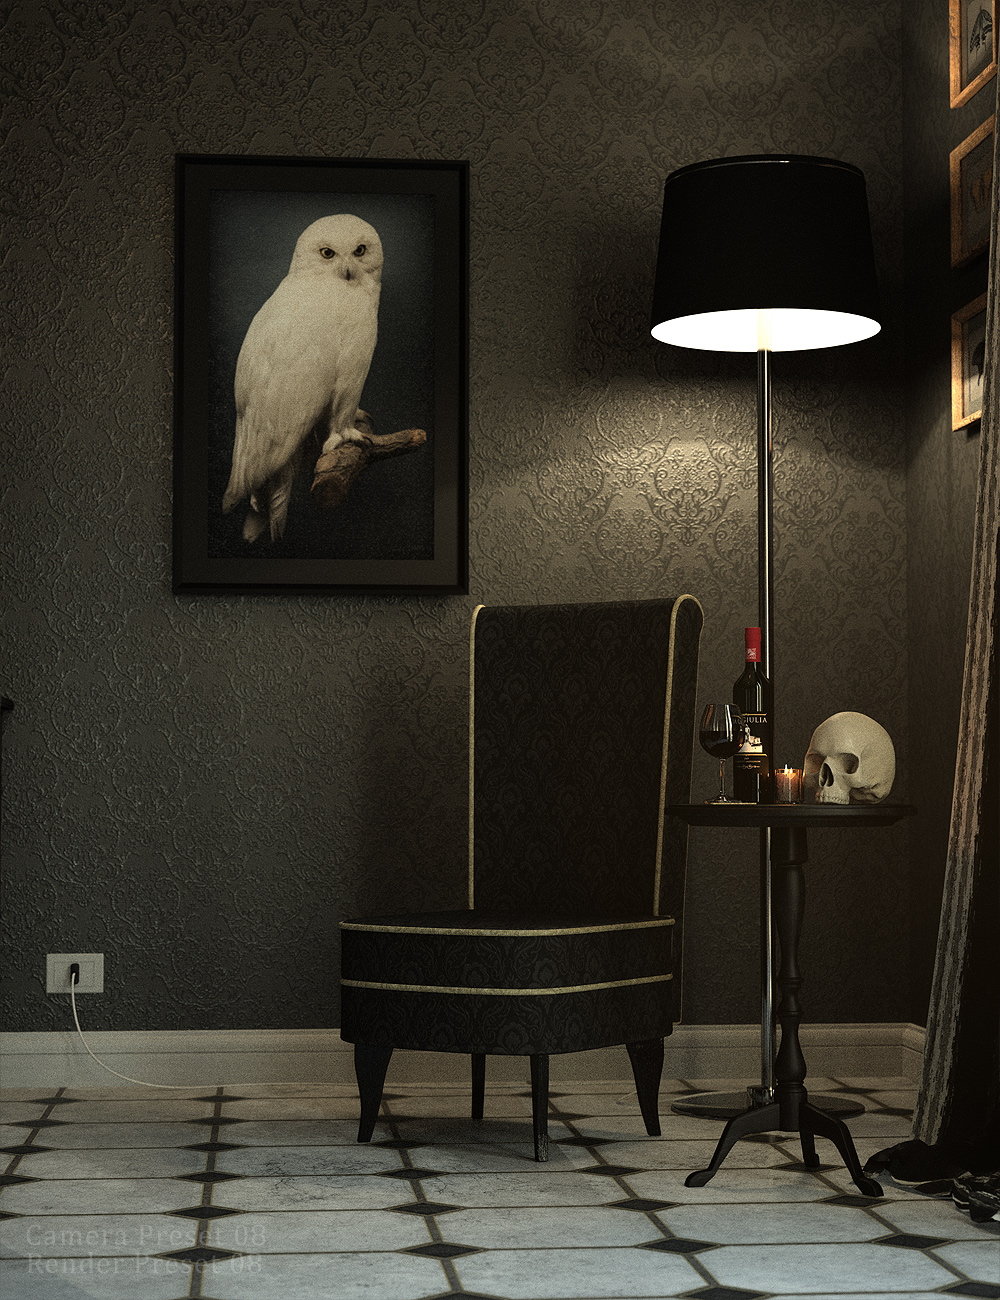 Lights And Cameras For The Venezia Suite by: Stonemason, 3D Models by Daz 3D